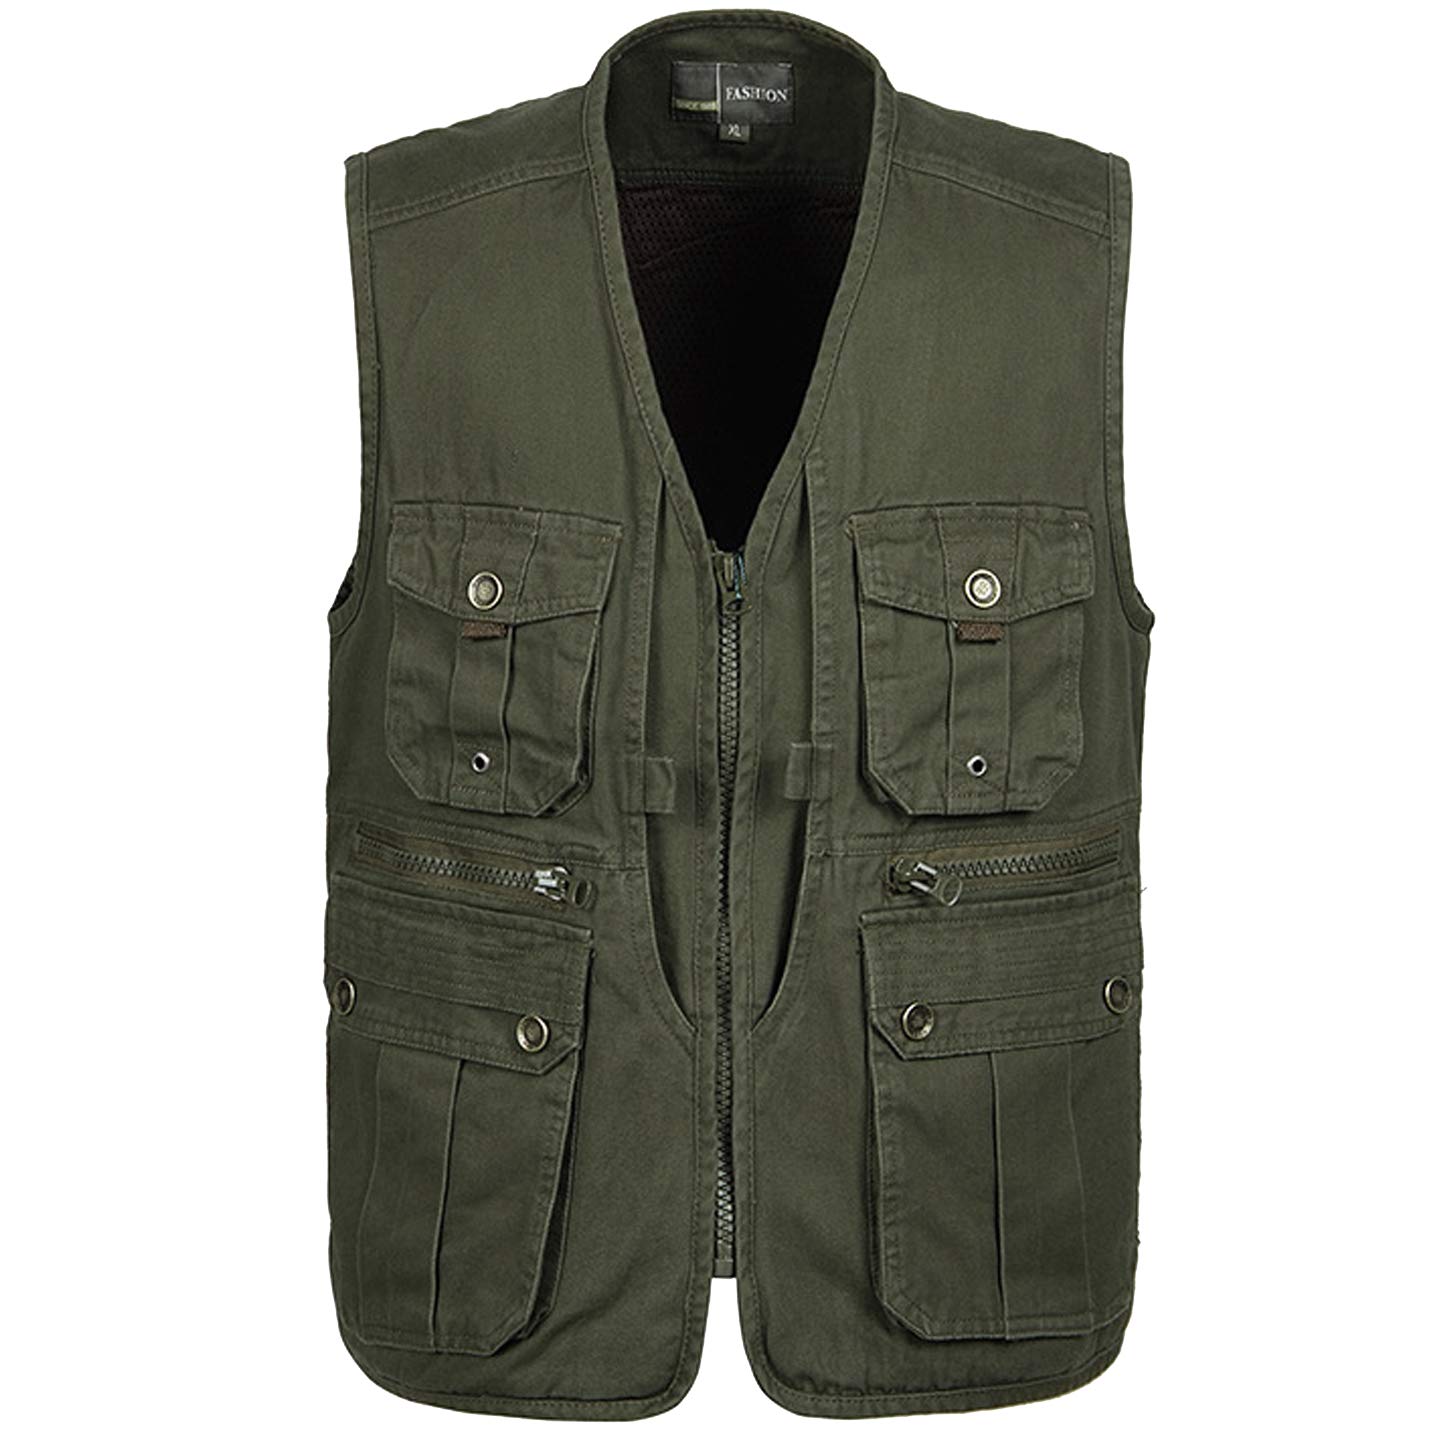 Flygo Mens Casual Outdoor Work Utility Safari Fishing Travel Vest with  Pockets Large Light Green